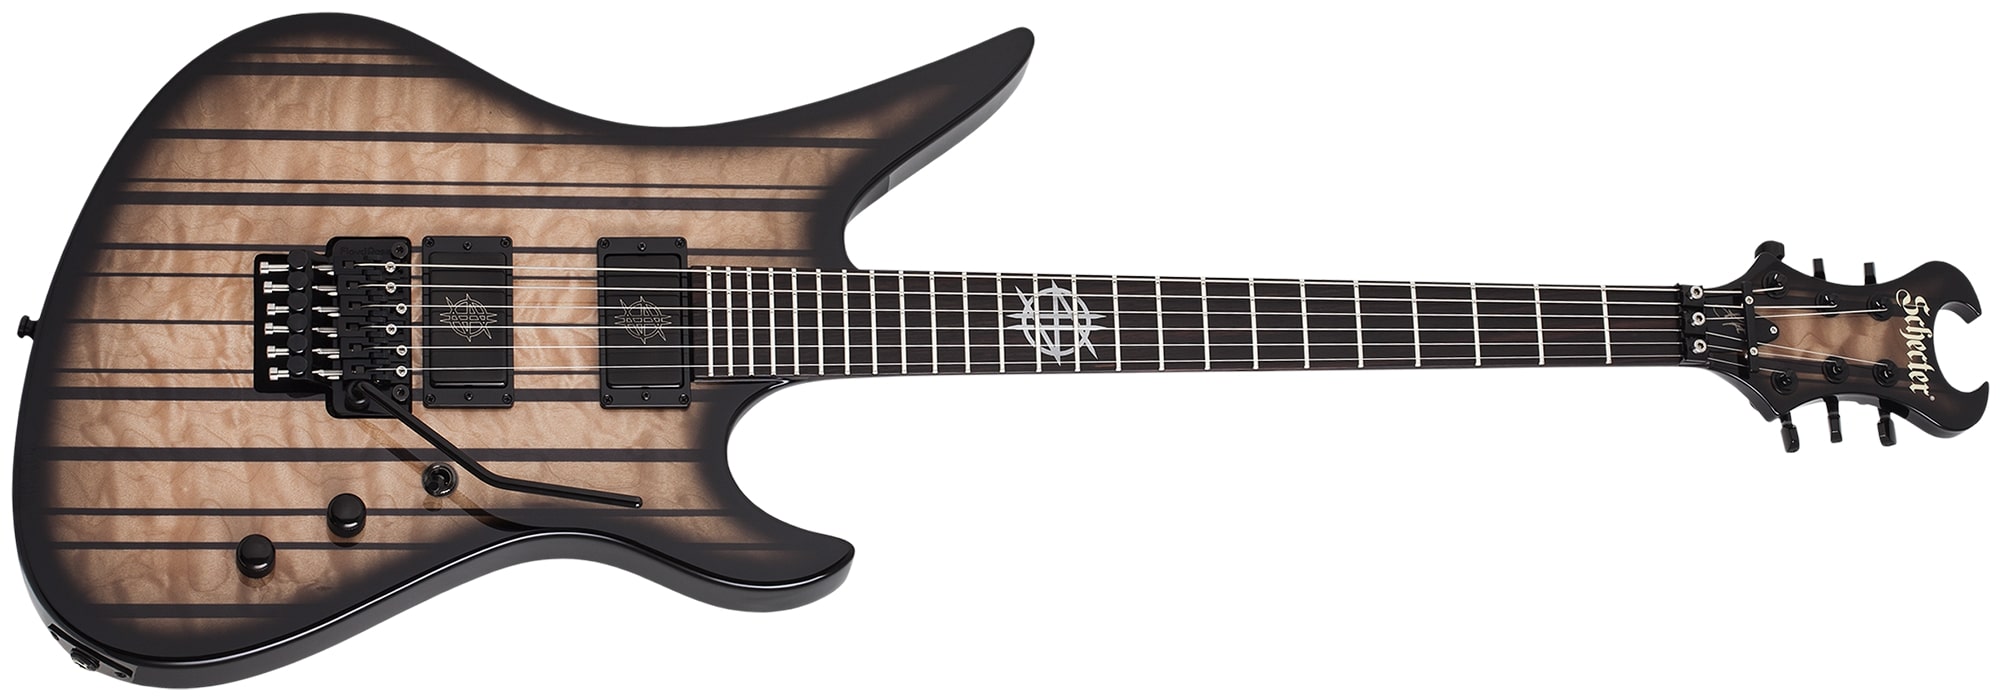 Schecter Synyster Gates FR QM USA Signature Electric Guitar Trans Clear Black Burst with Pinstripe 7076-SHC